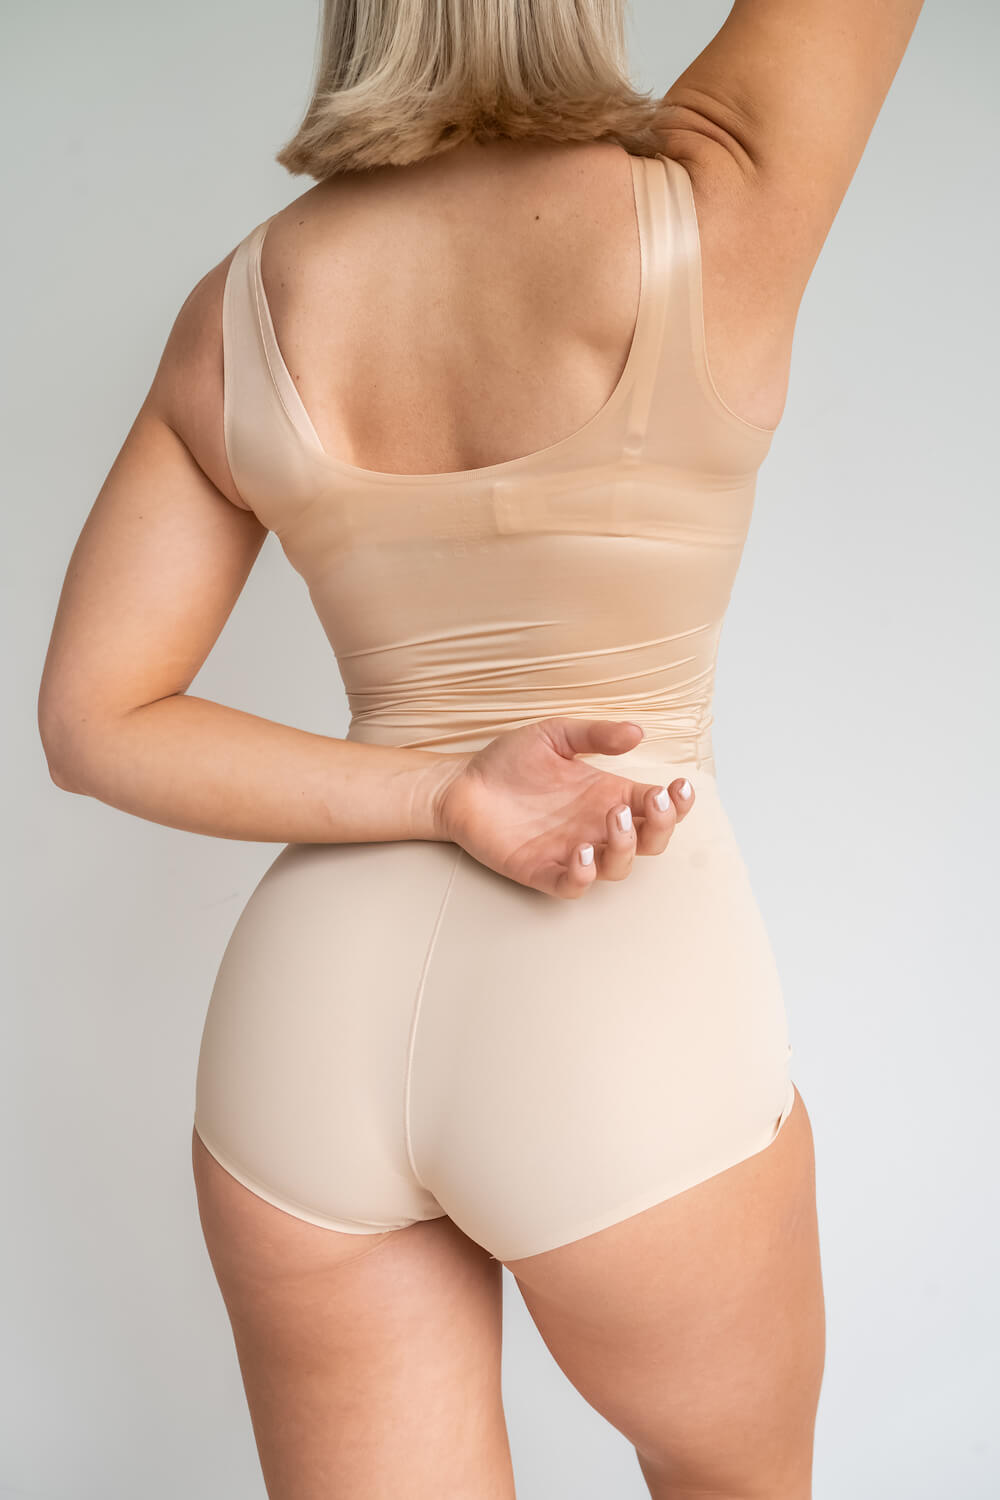 Vacious - Feel best in our EVERY DAY VEST ✨ #vacious #shapewear